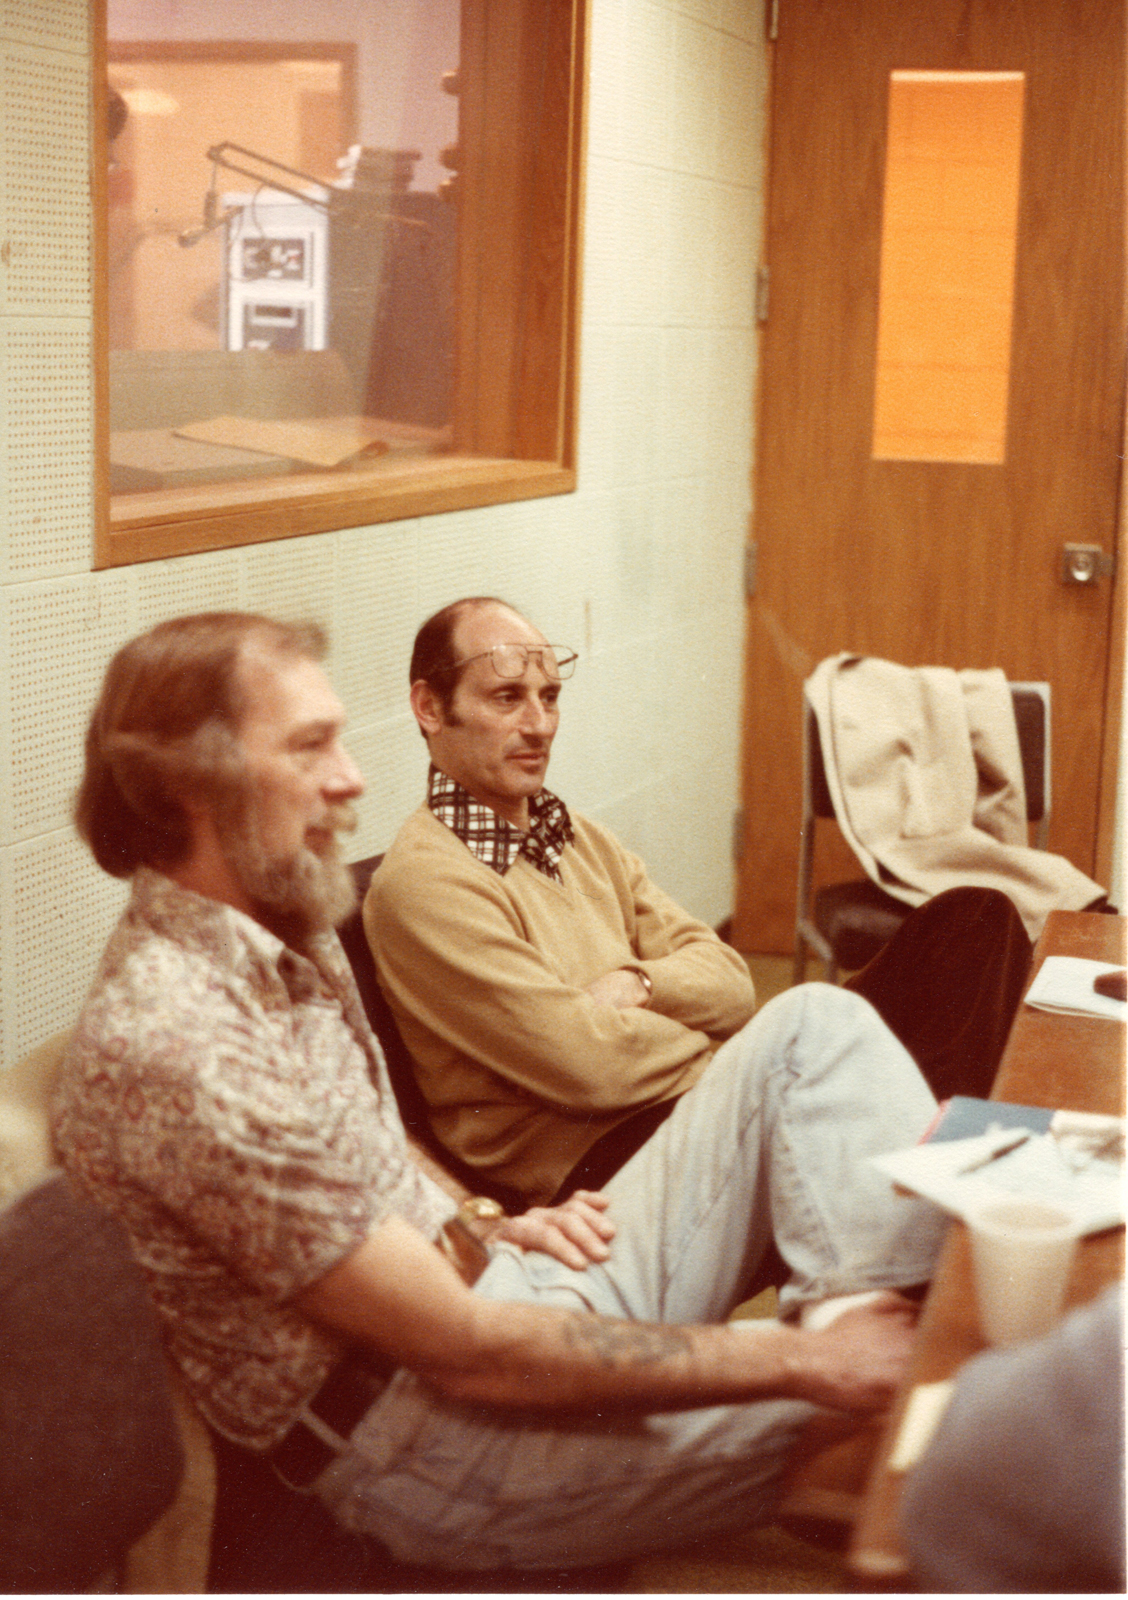 1978 Mike Blishak in Studio A - Possibly this photo was taken during the interview for the 30 Years on the Banks program.